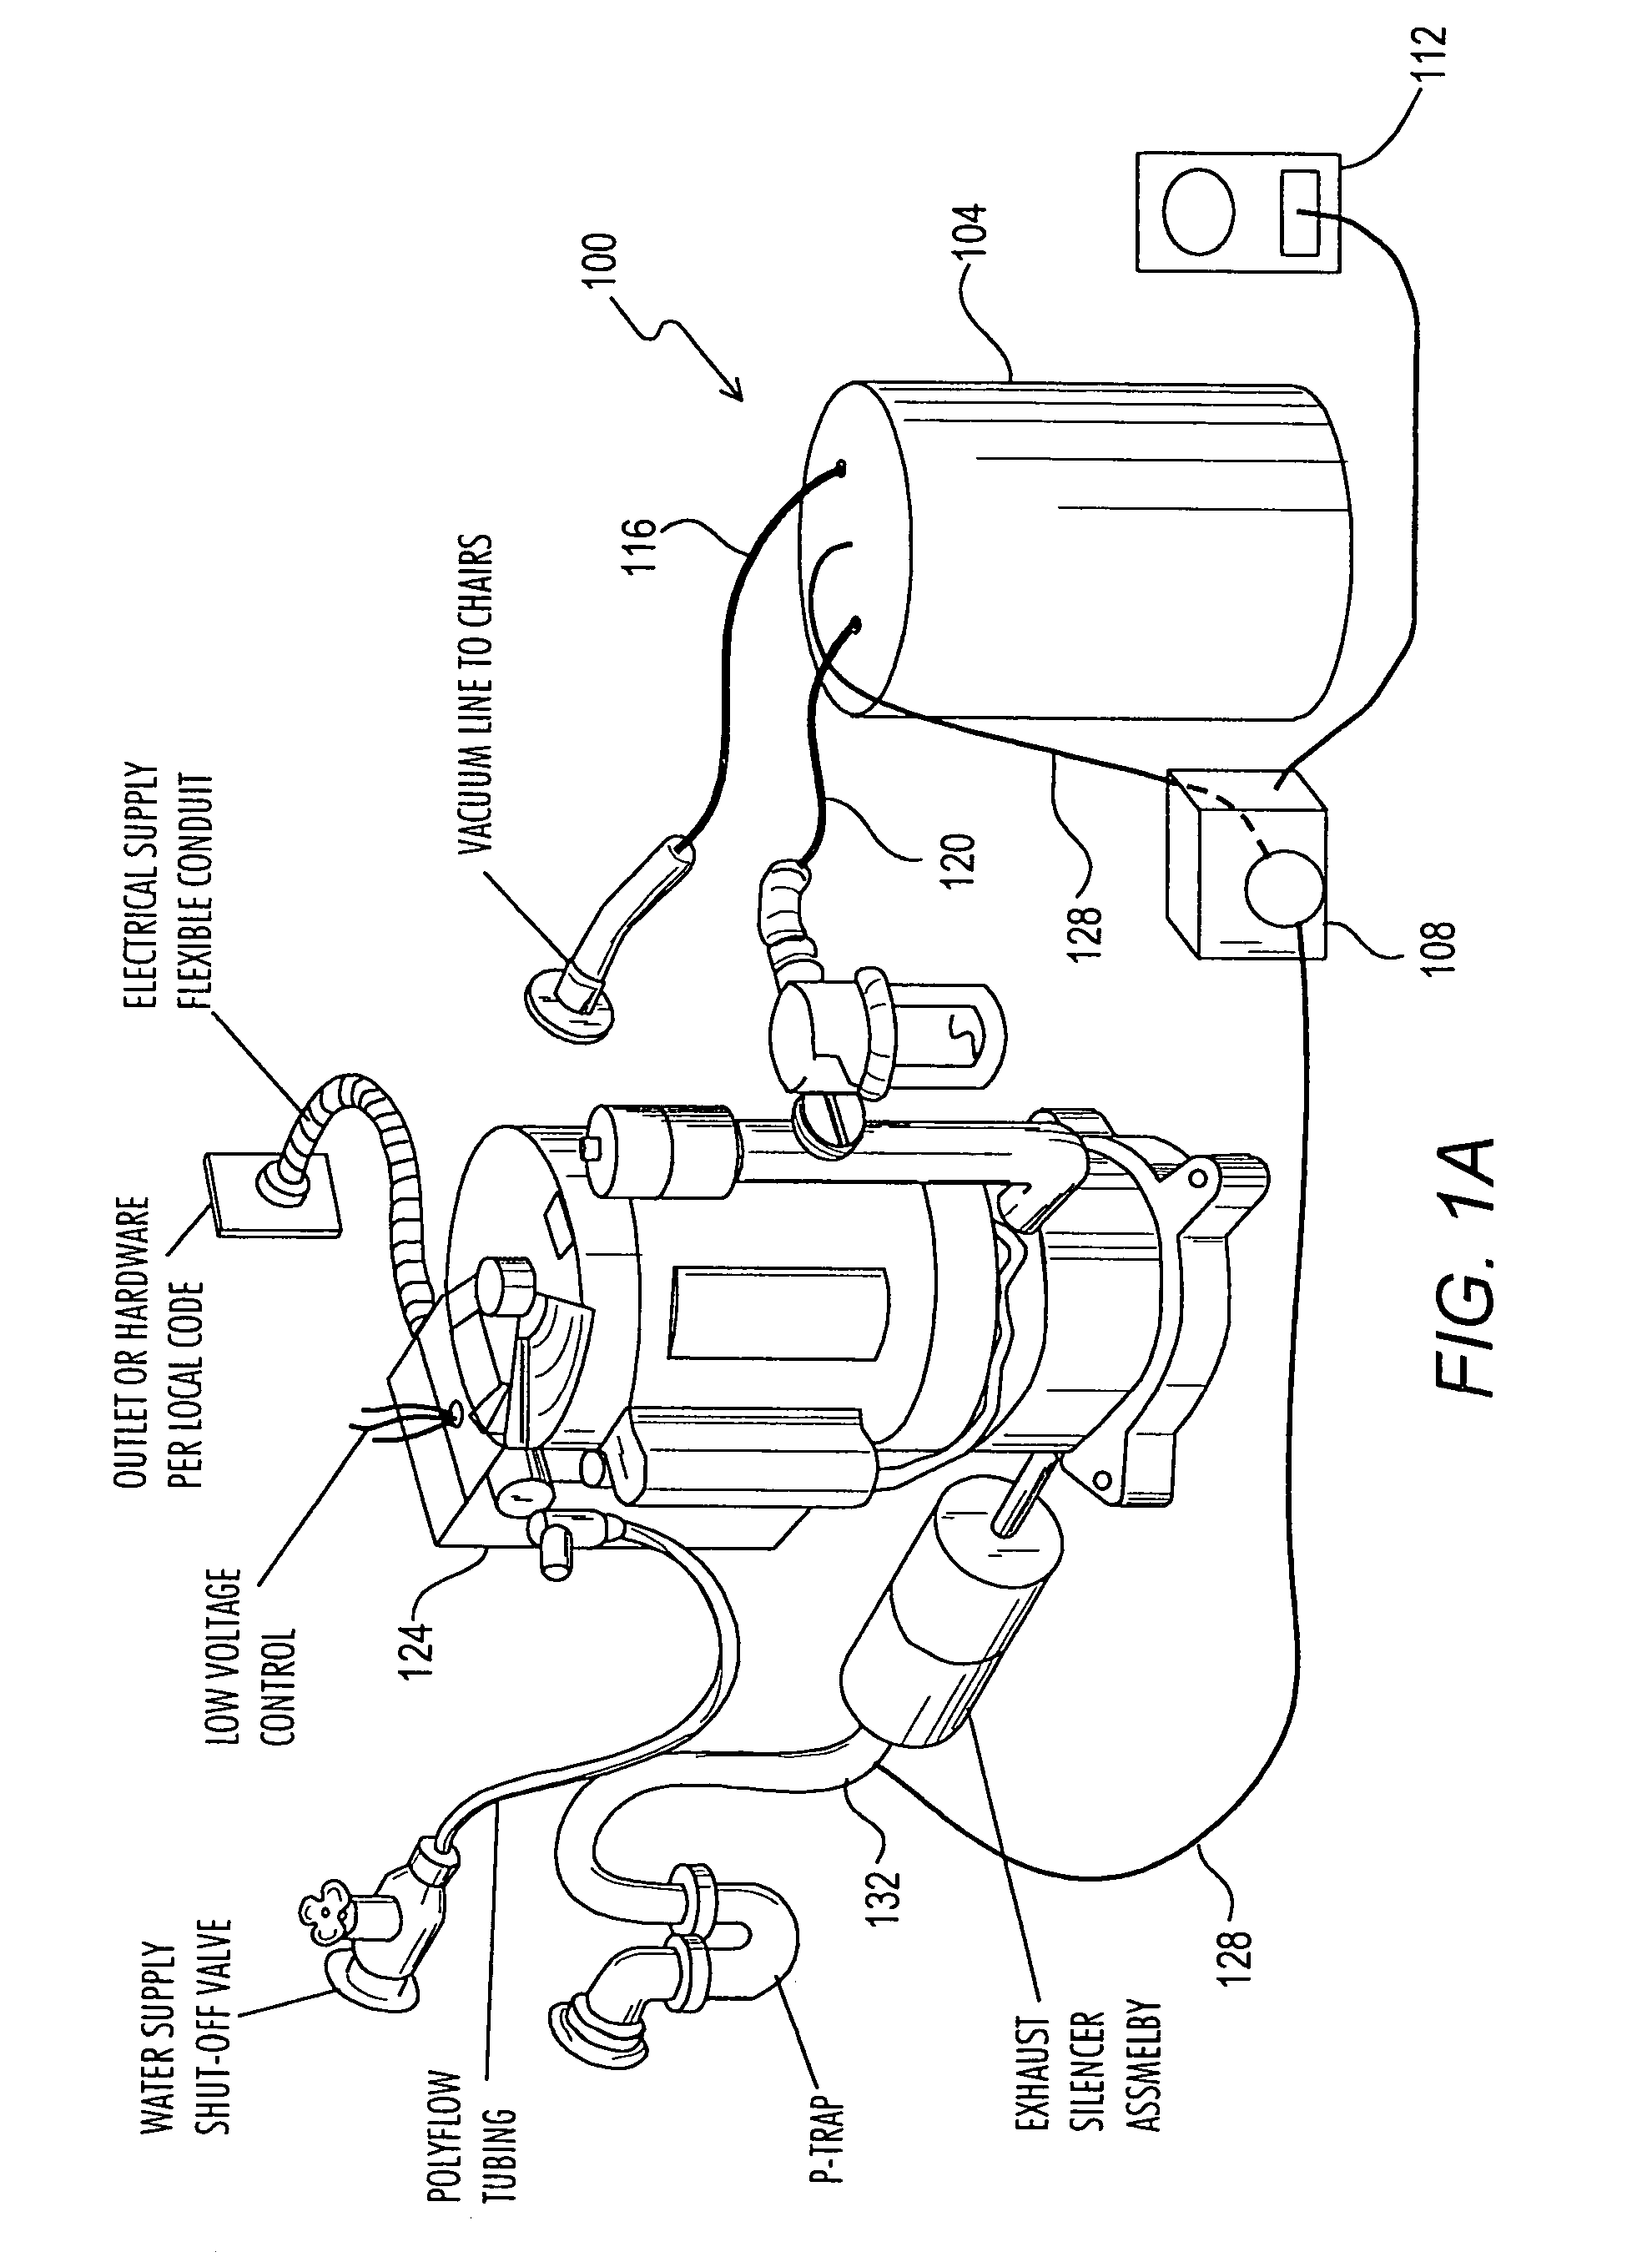 Apparatus and method for removing mercury and mercuric compounds from dental effluents